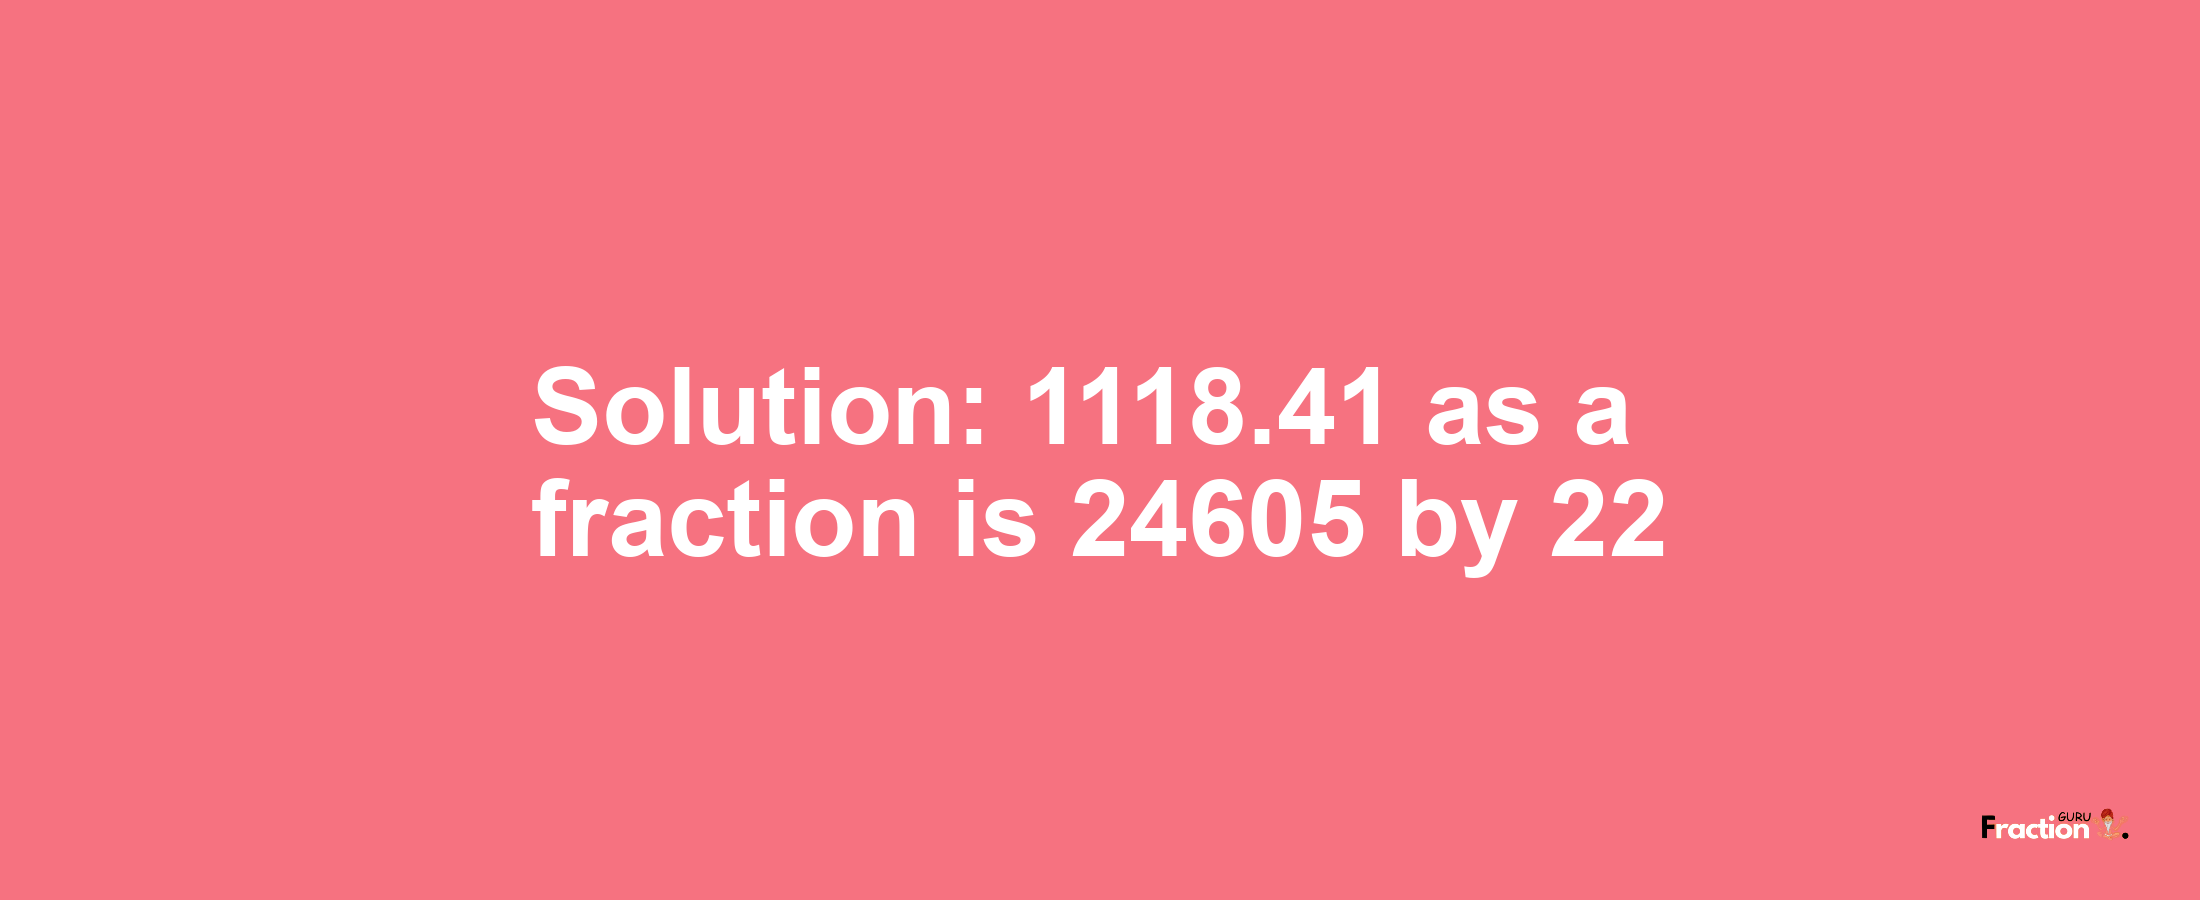 Solution:1118.41 as a fraction is 24605/22